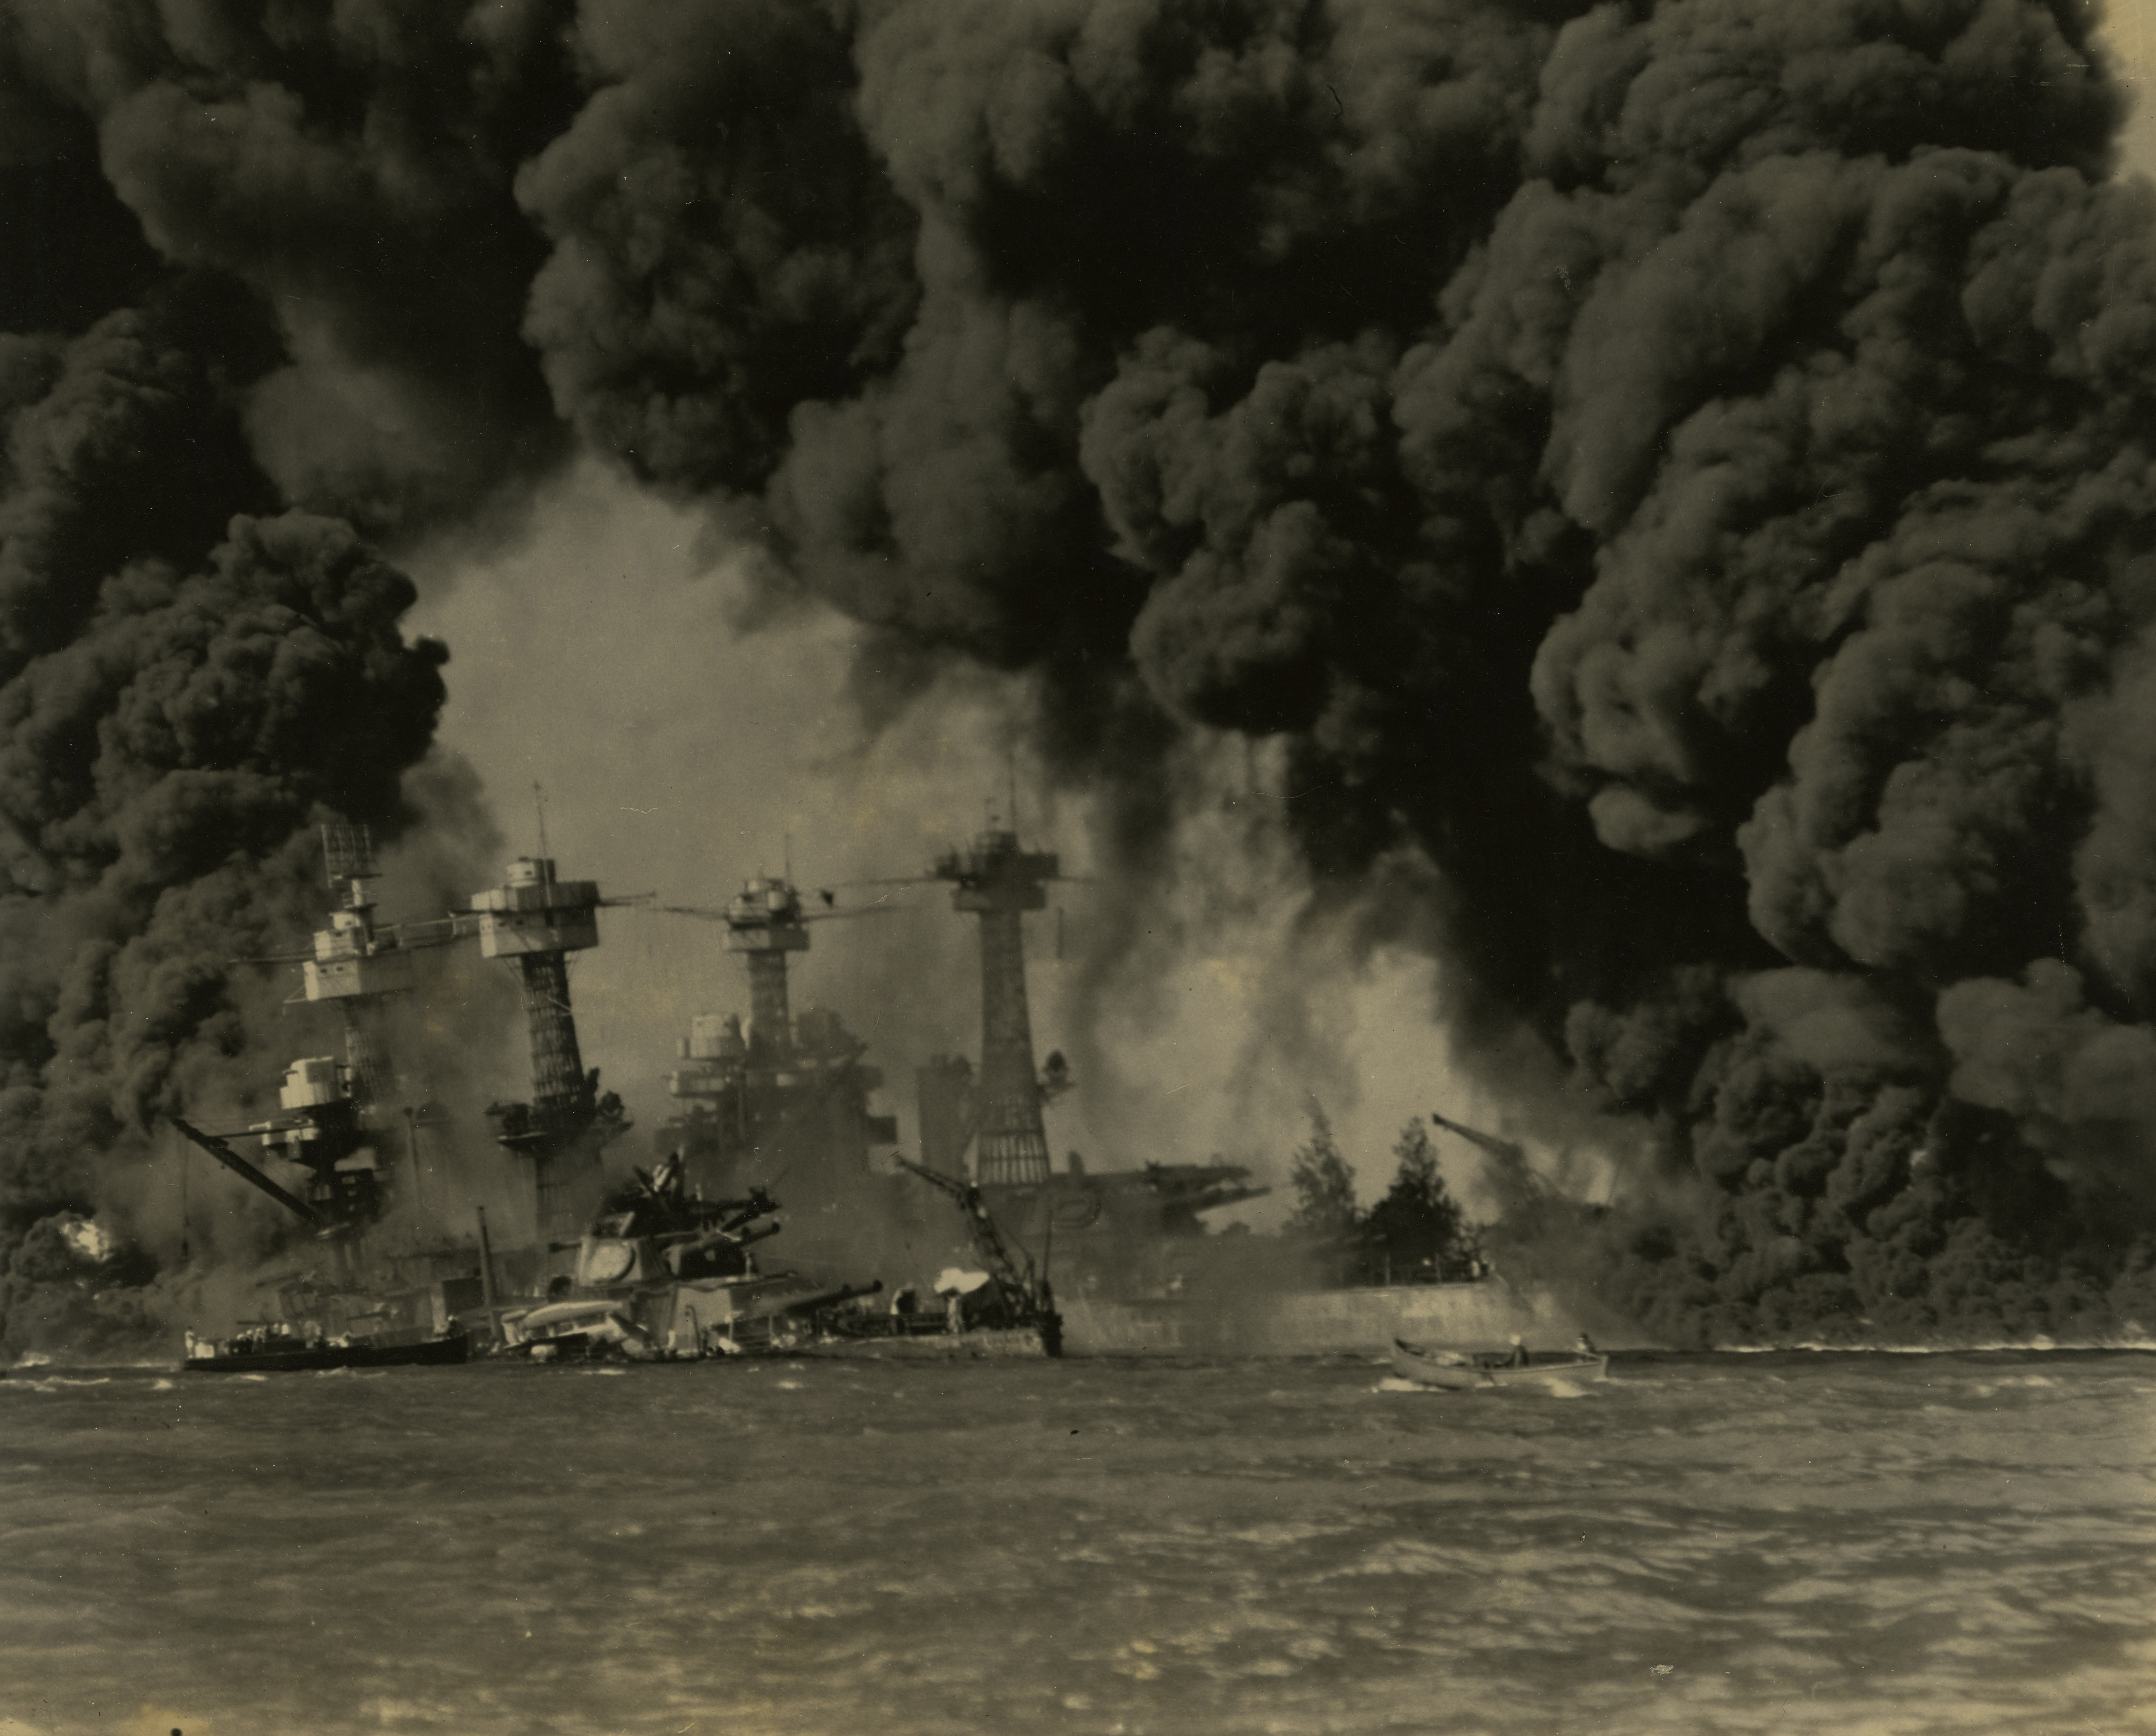 Sailors attempt to put out fires on USS West Virginia Pearl Harbor Photo Print